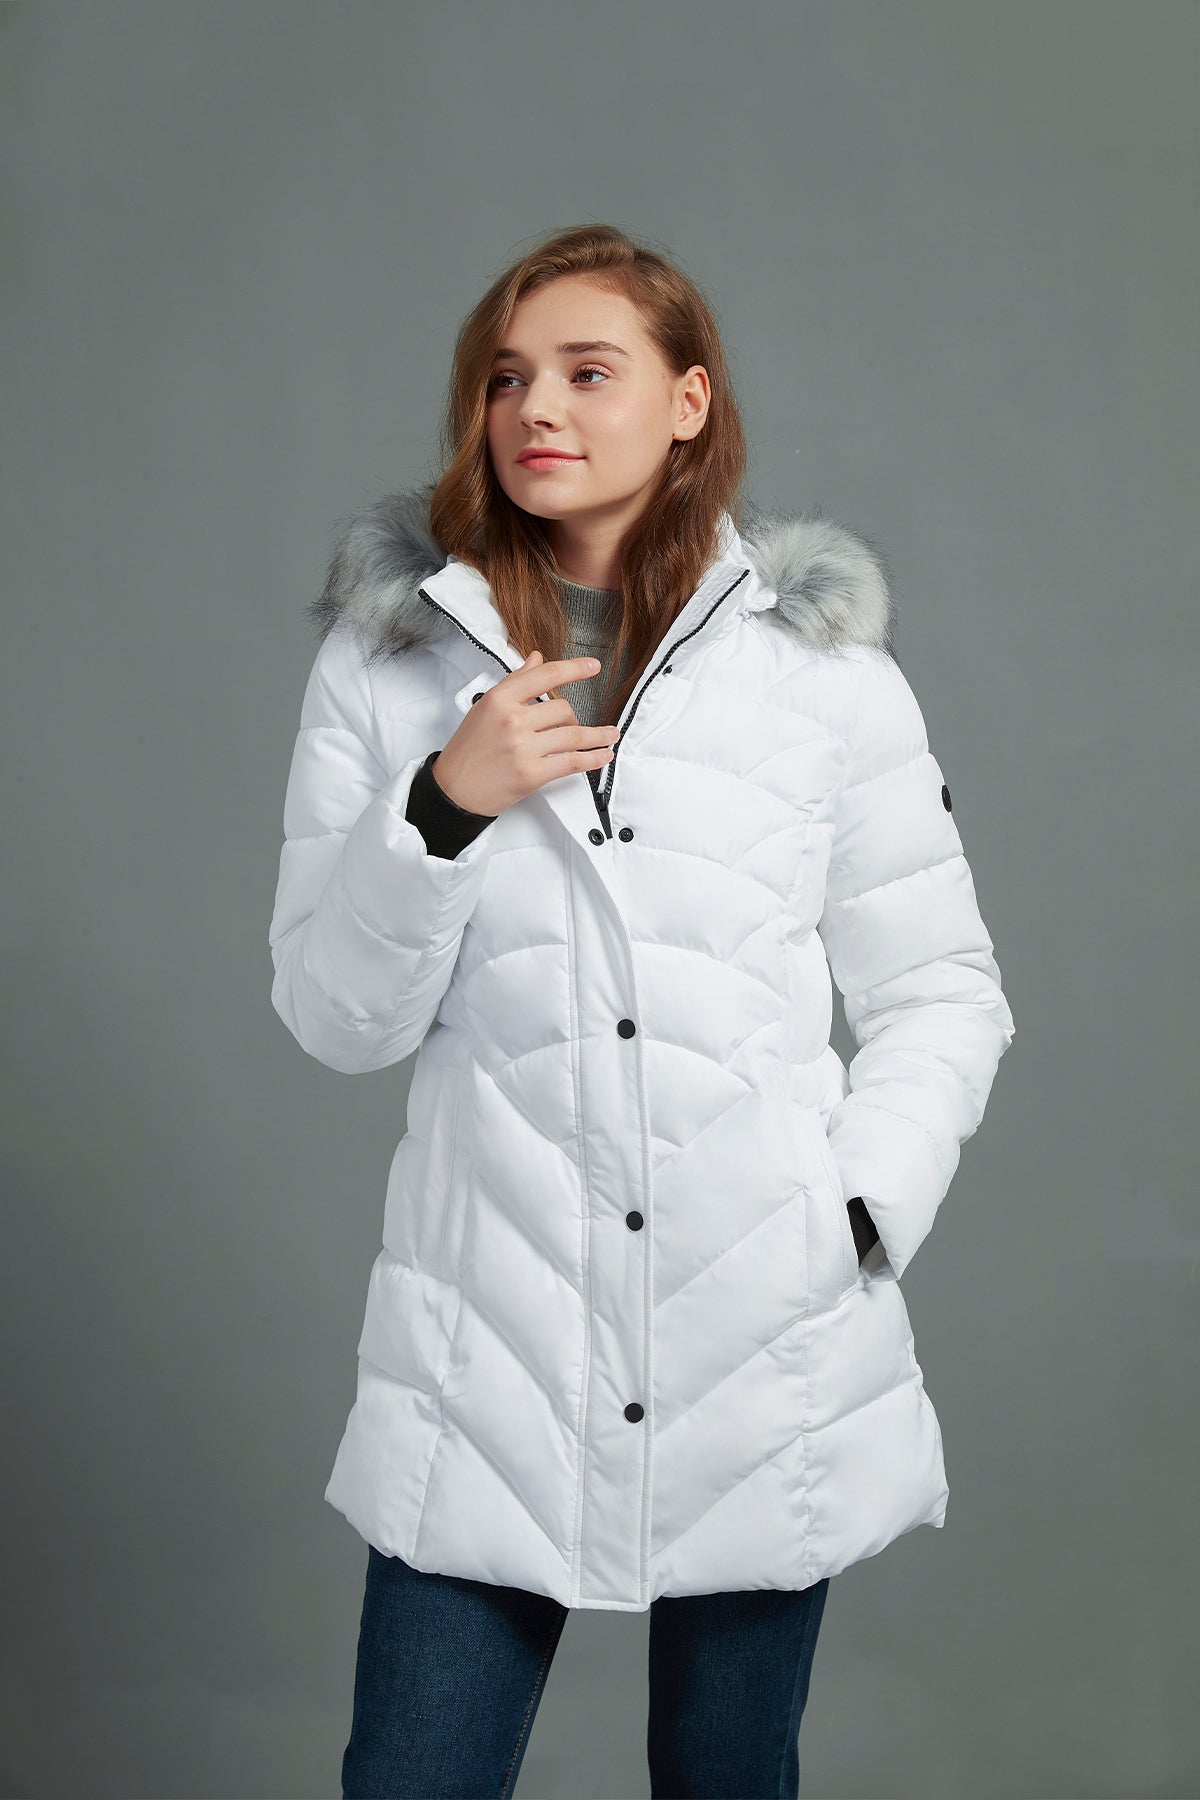 YHIWU Winter Jacket for Women Quilted Jacket with Fur Hood Puffer